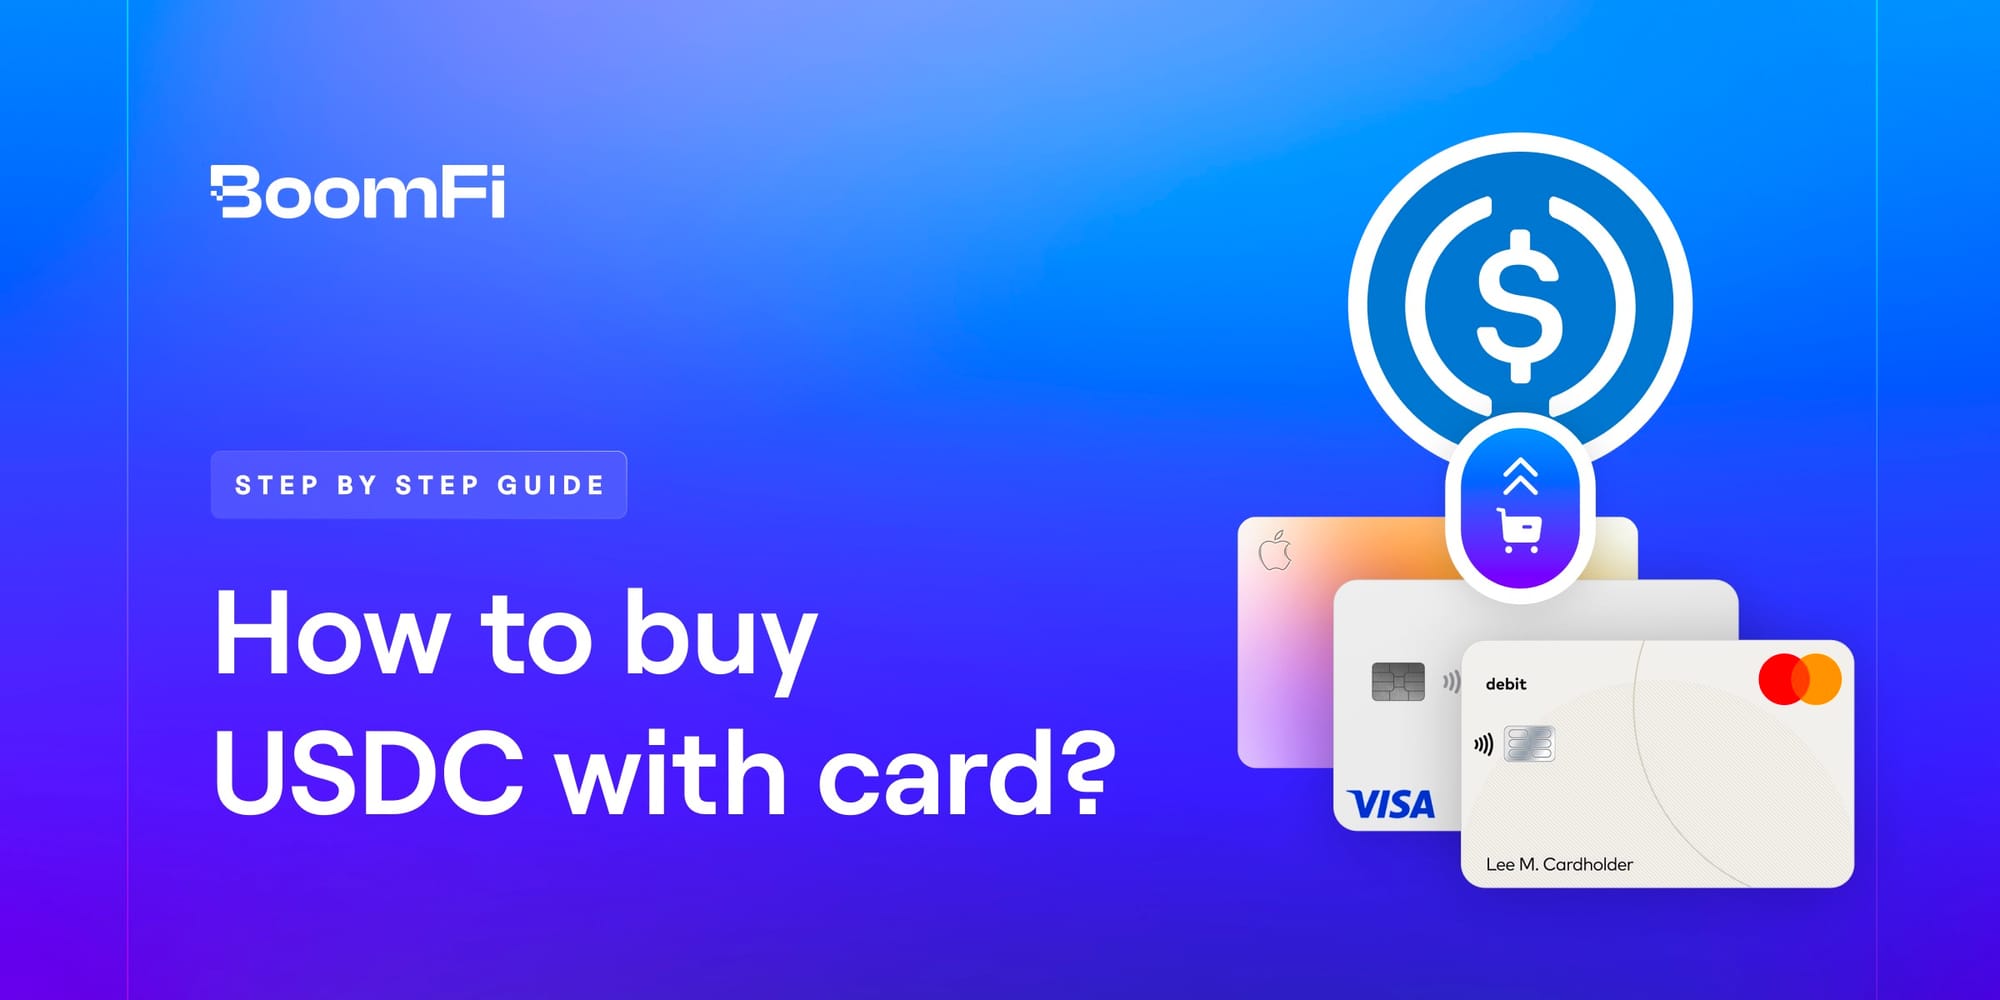 How to Buy USDC with a Credit or Debit Card